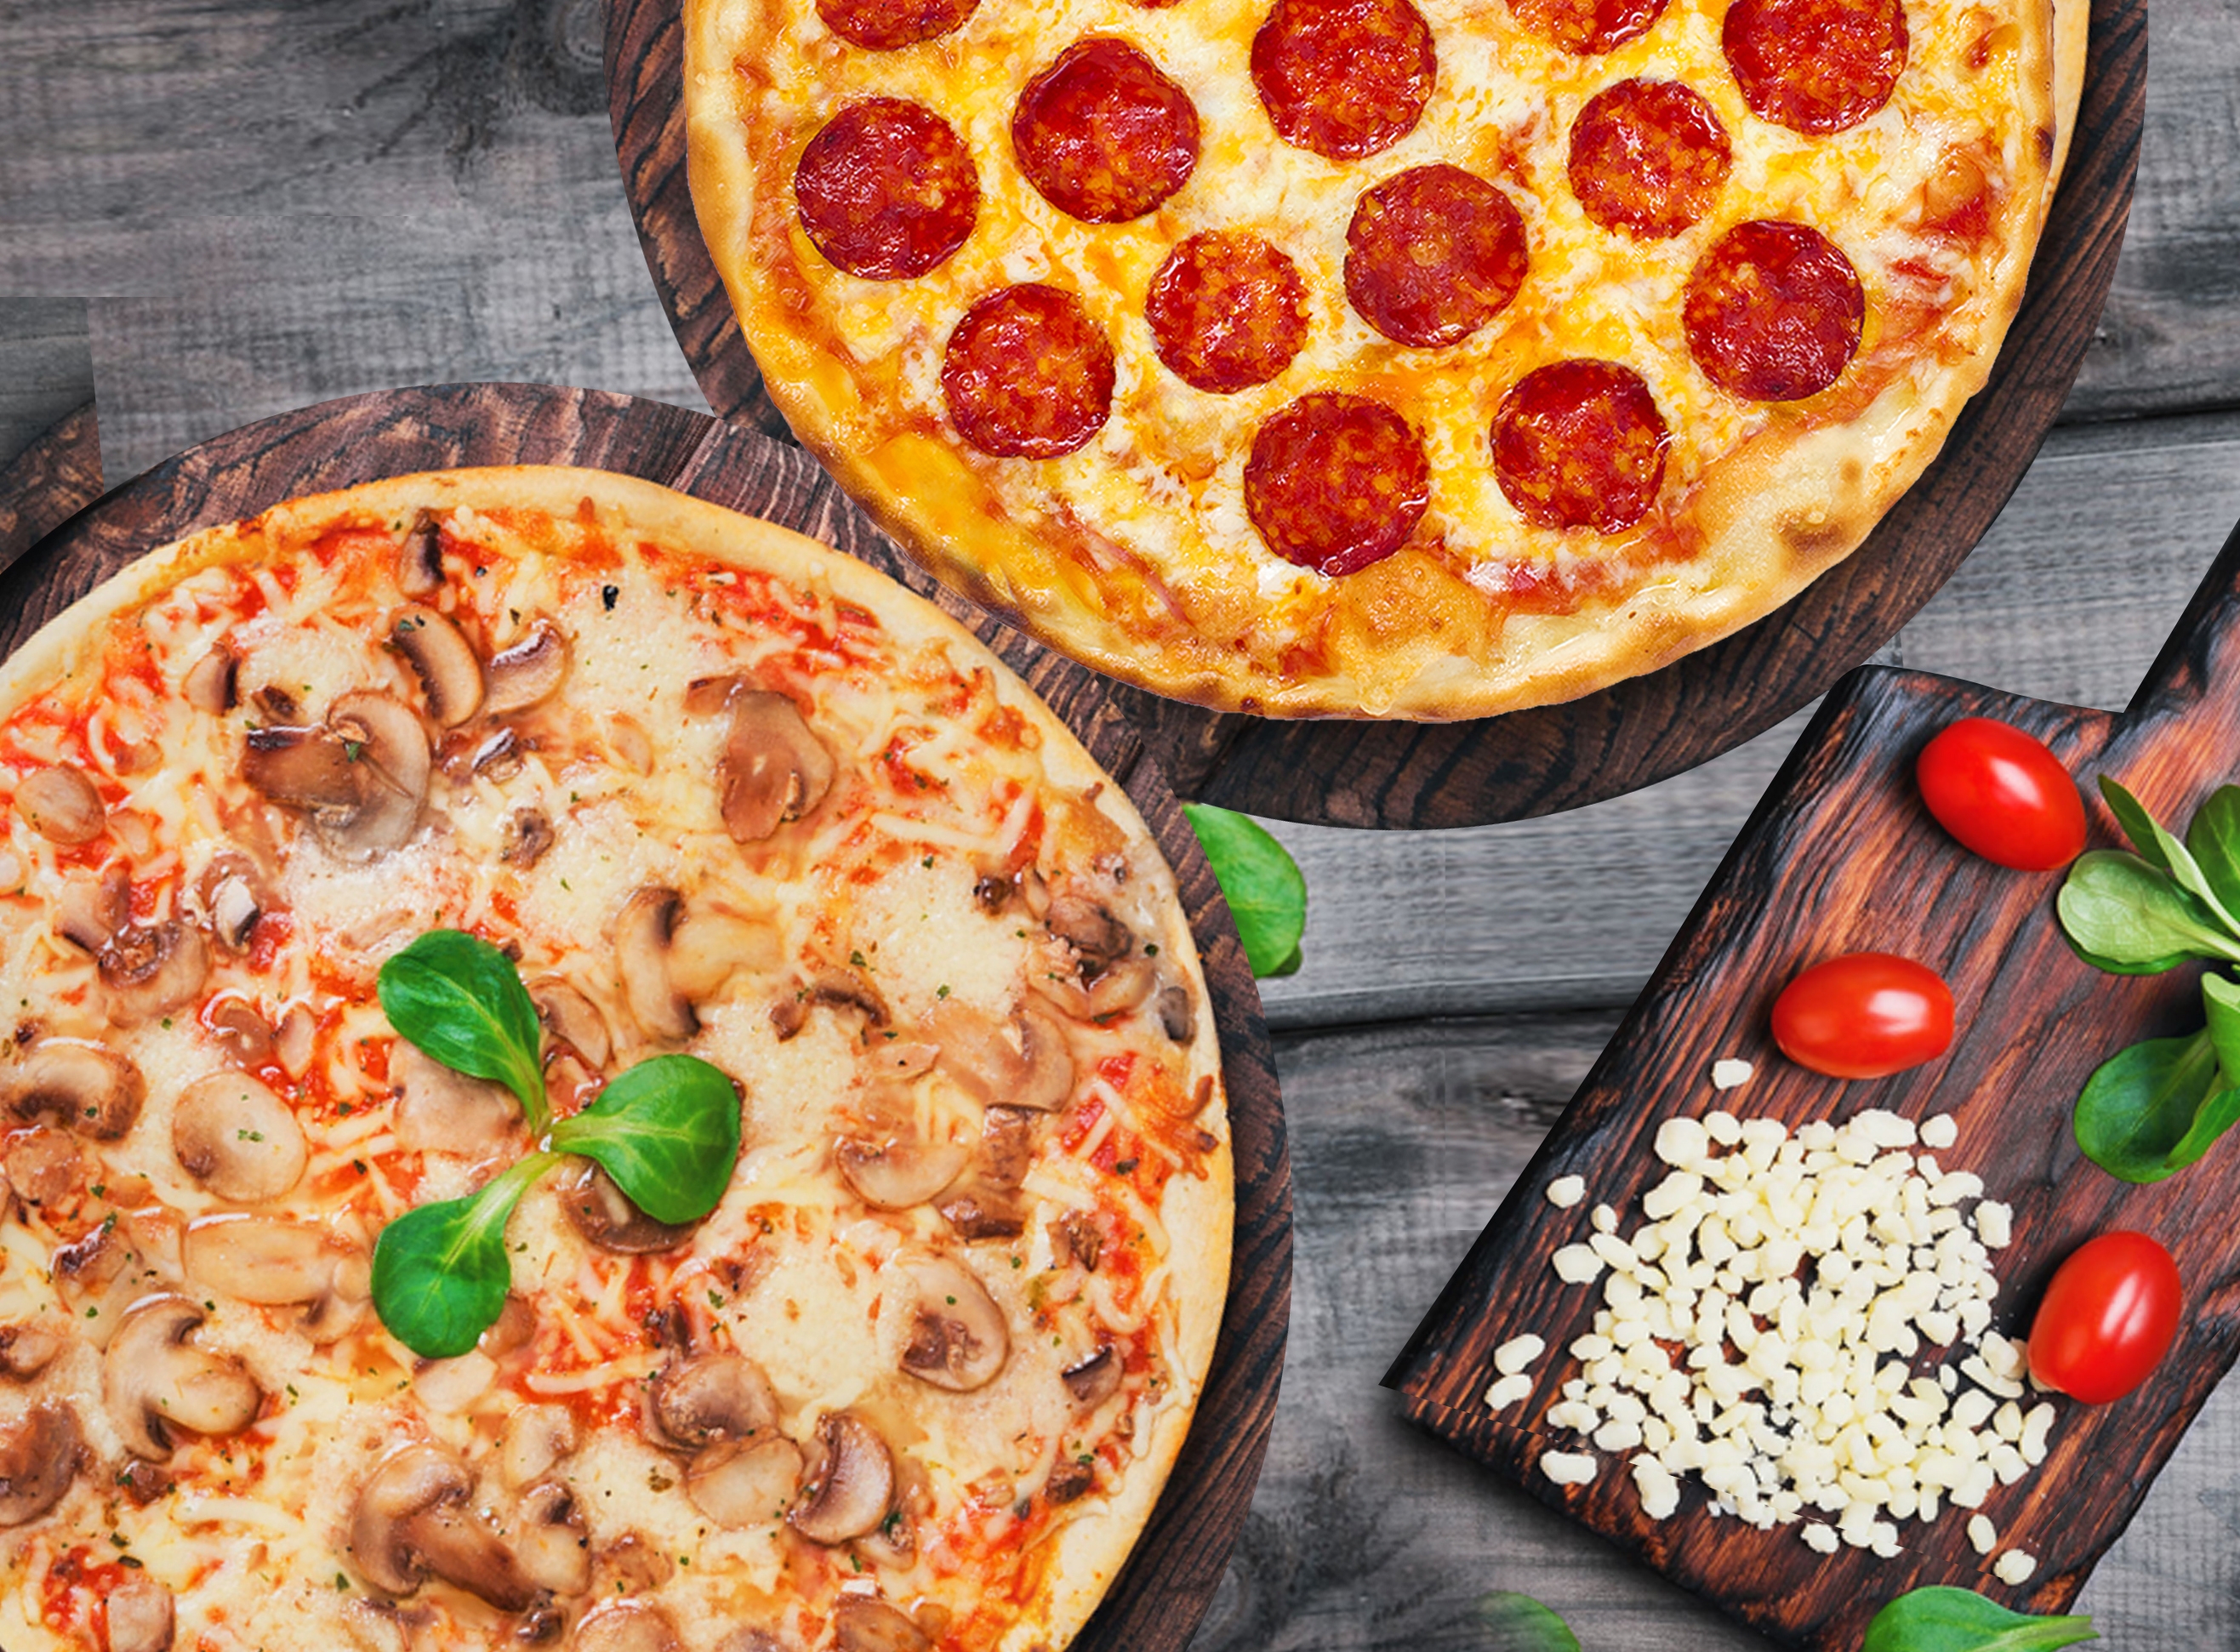 Manila Pavilion Hotel is making a pizza offer that you can’t refuse